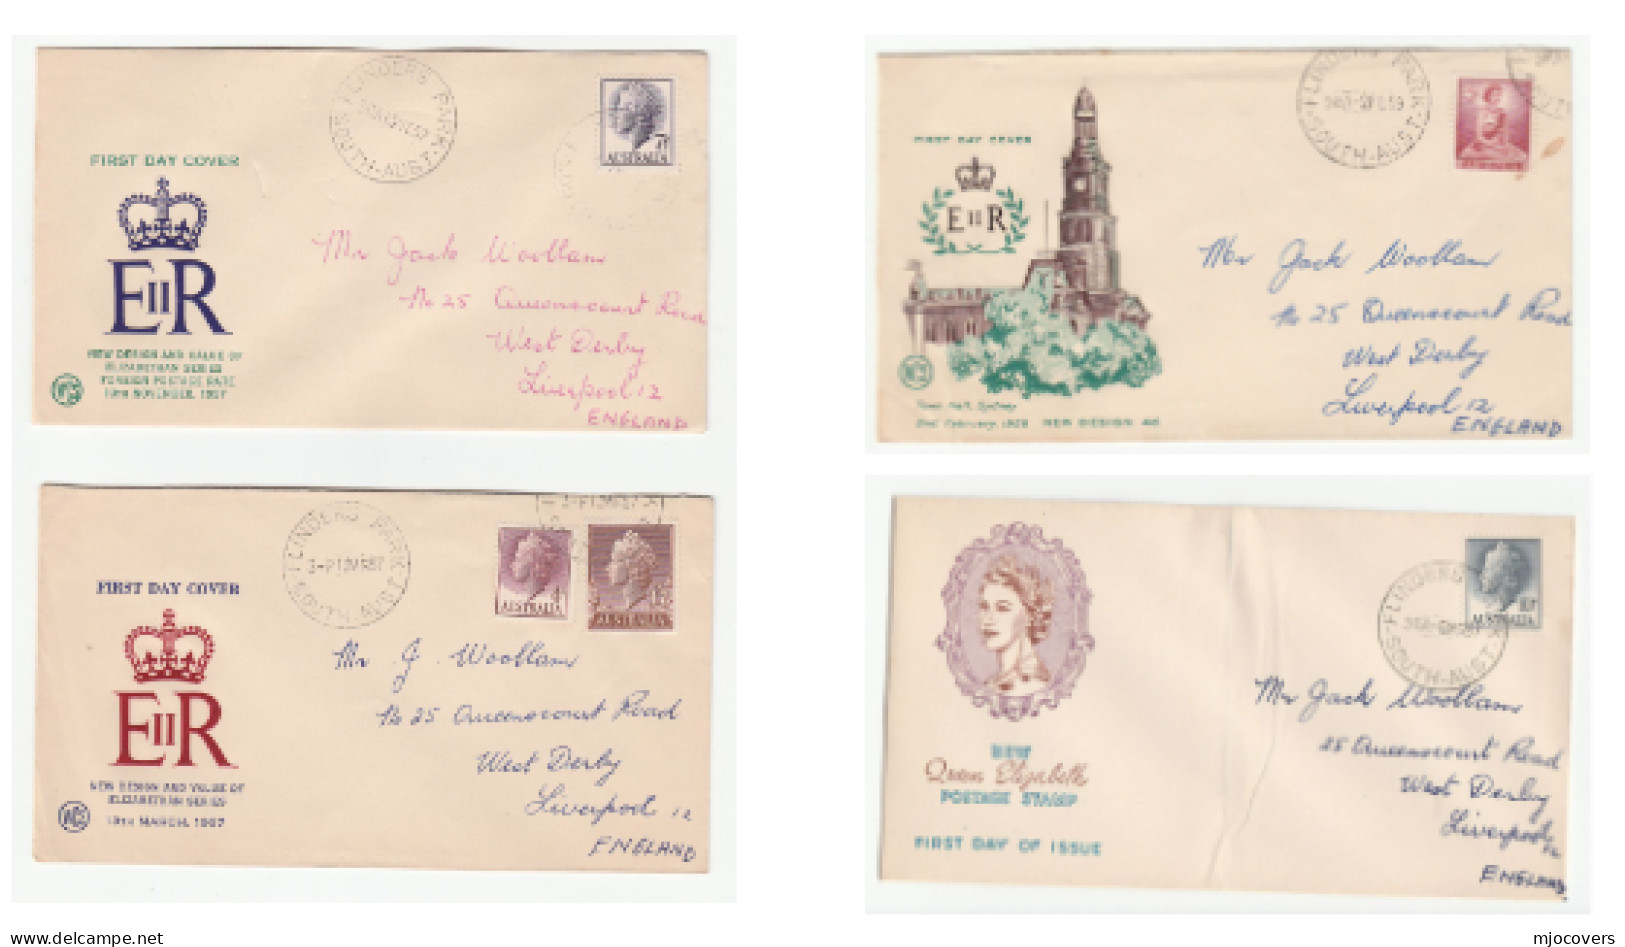 4 Diff 1957 -59 AUSTRALIA FDCs  1/7, 4d,  7 1/2d , 10d,  8d Stamps Flinders Park  To GB  Fdc Cover - Primo Giorno D'emissione (FDC)